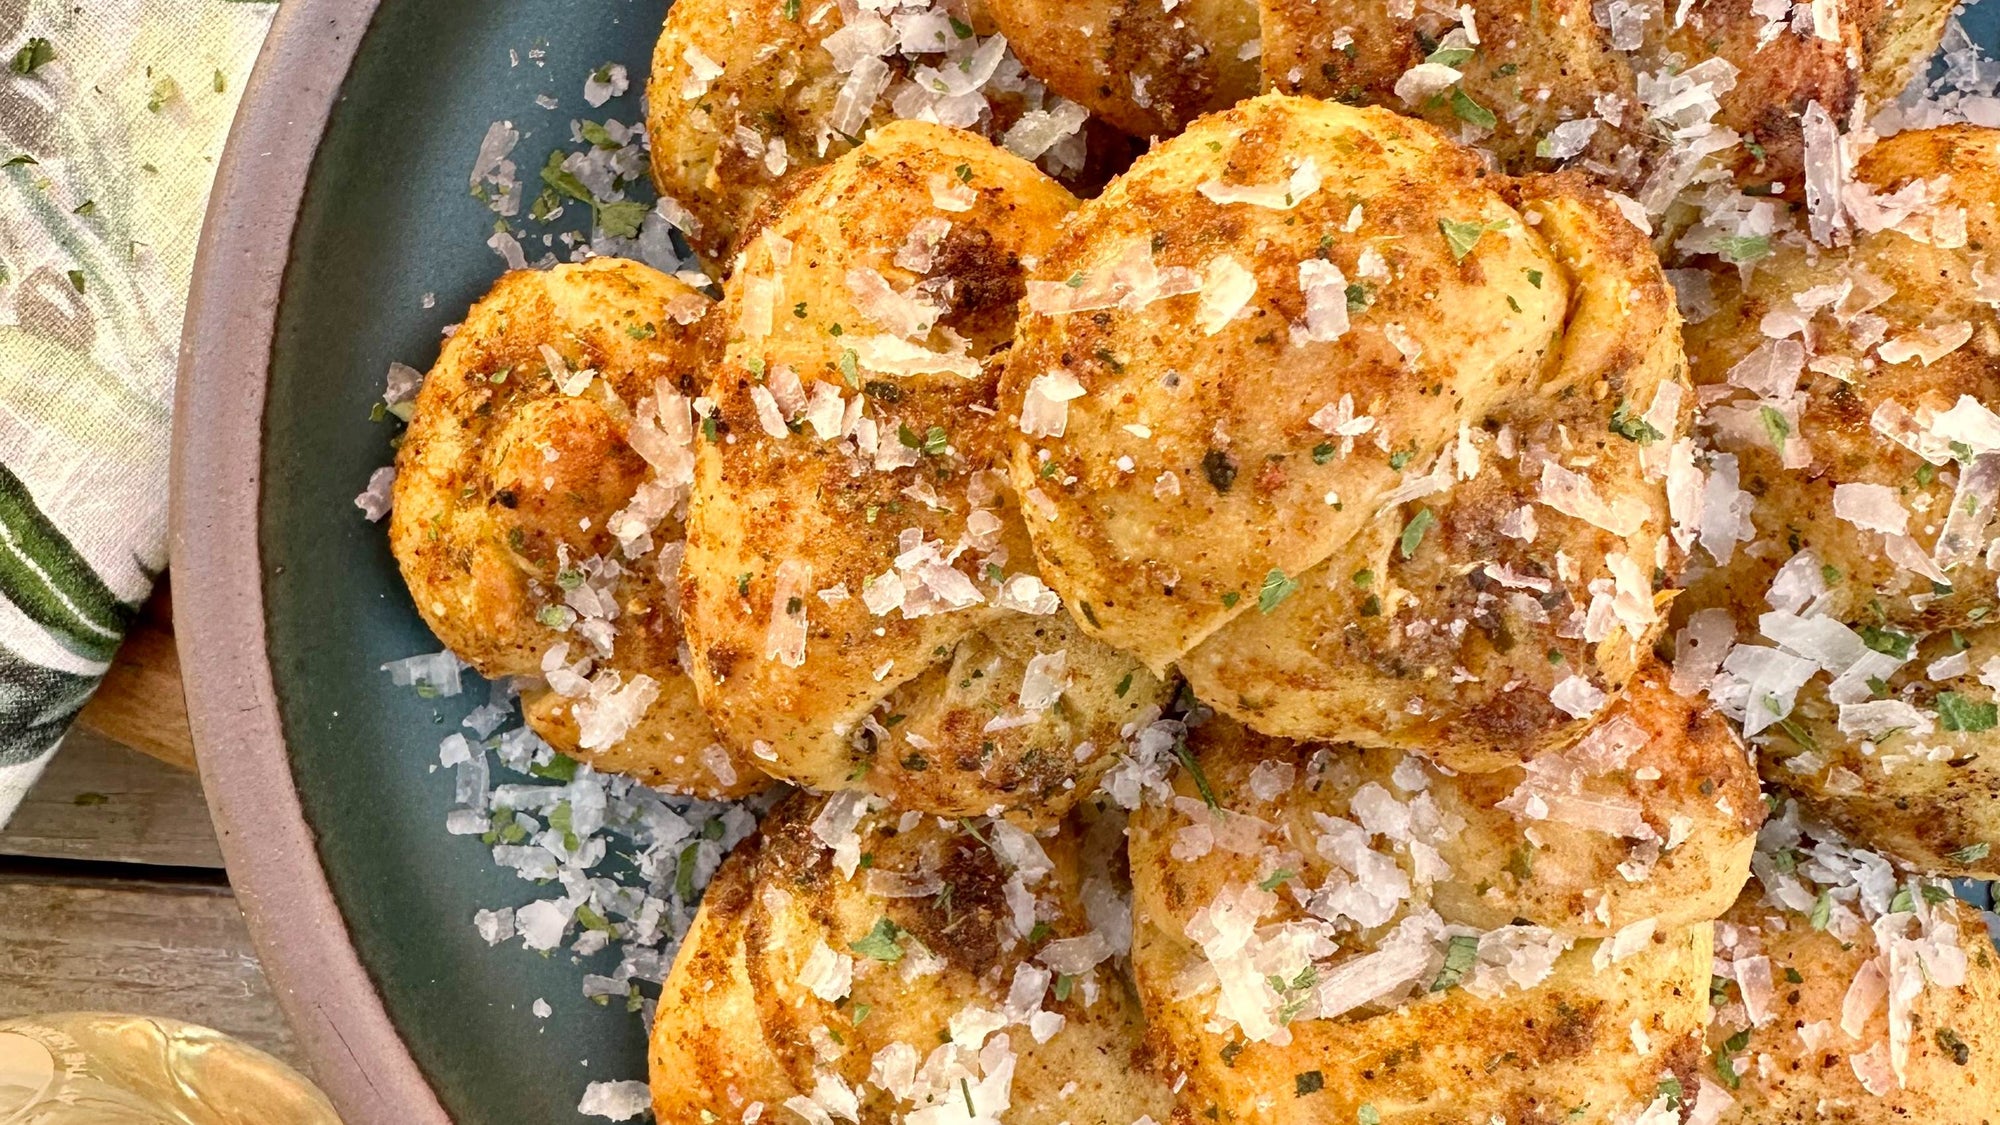 A ceramic plate of garlic knots covered in butter, Magic Garlic Dust, and herbs